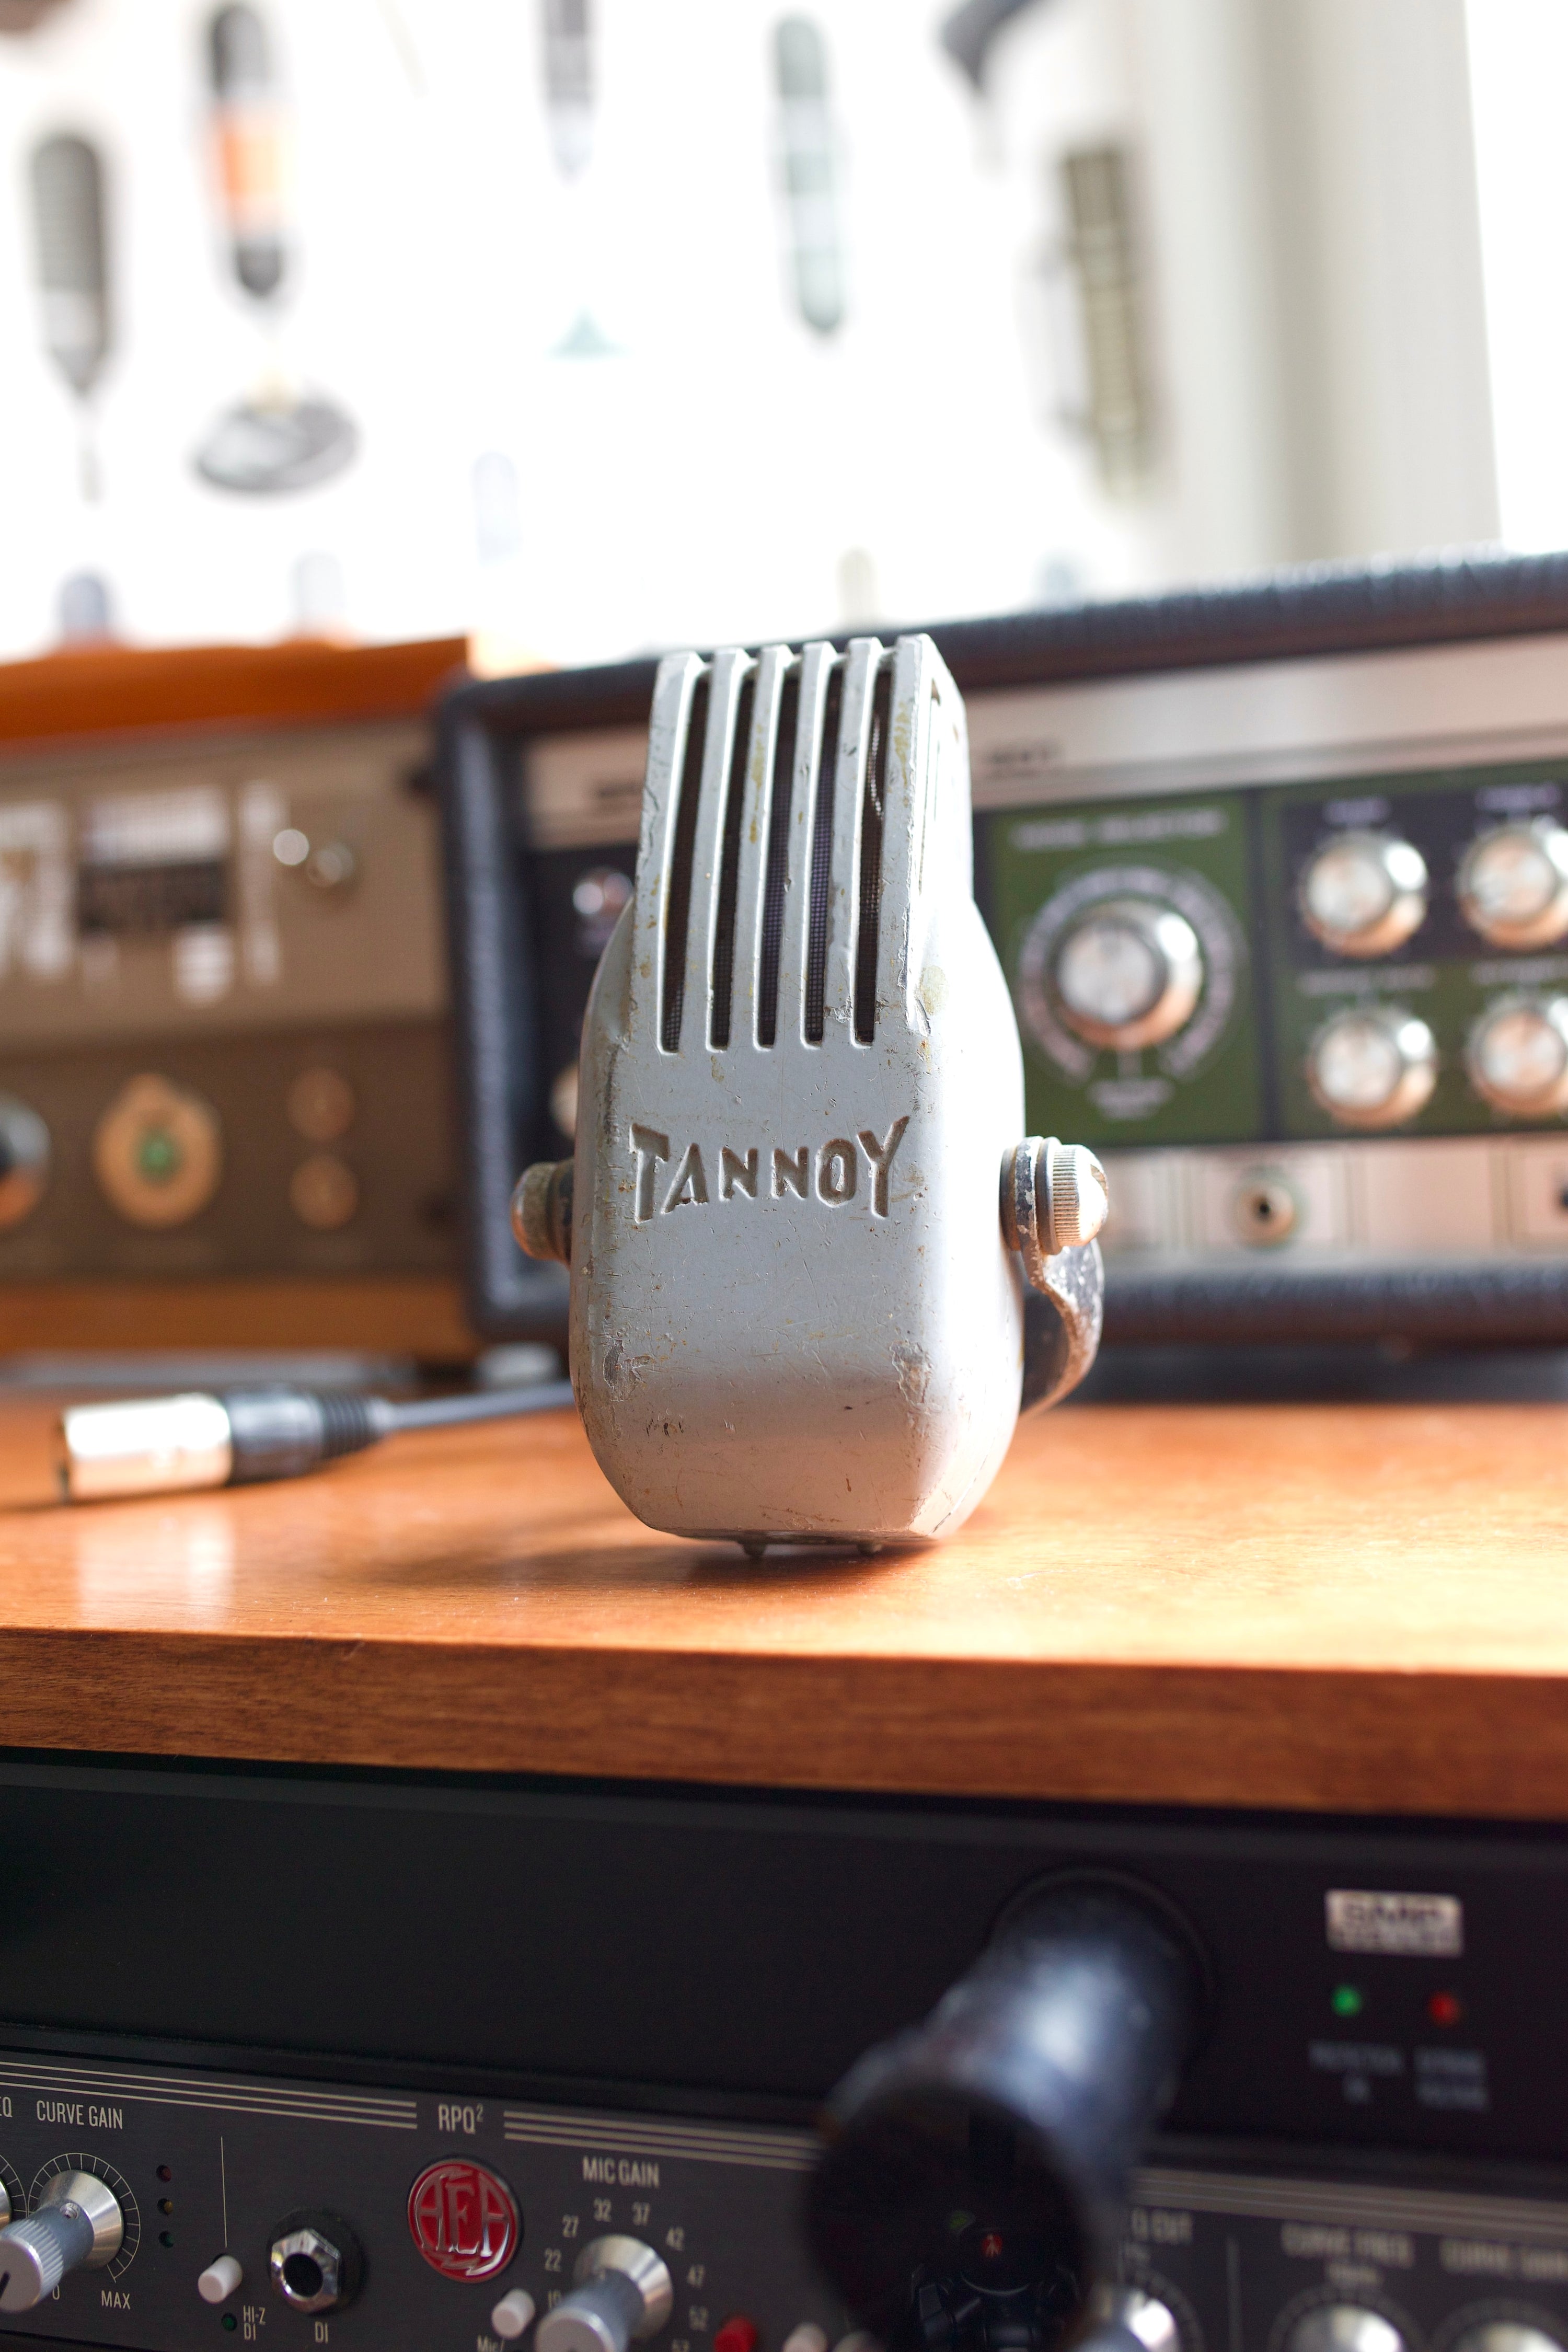 Tannoy Type 1 Ribbon Microphone